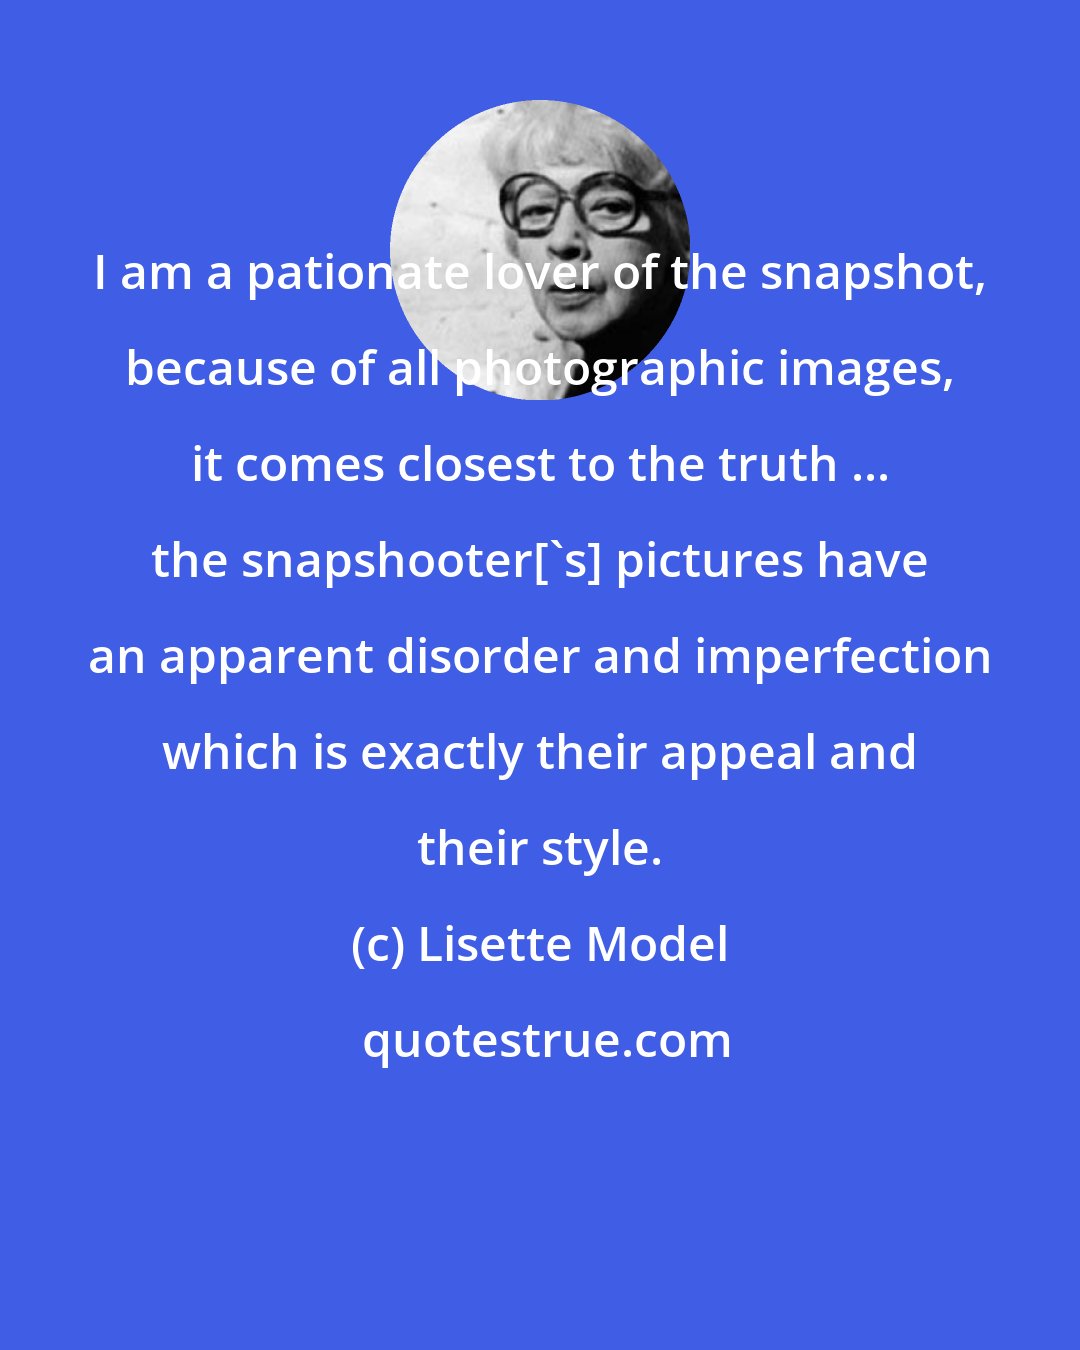 Lisette Model: I am a pationate lover of the snapshot, because of all photographic images, it comes closest to the truth ... the snapshooter['s] pictures have an apparent disorder and imperfection which is exactly their appeal and their style.